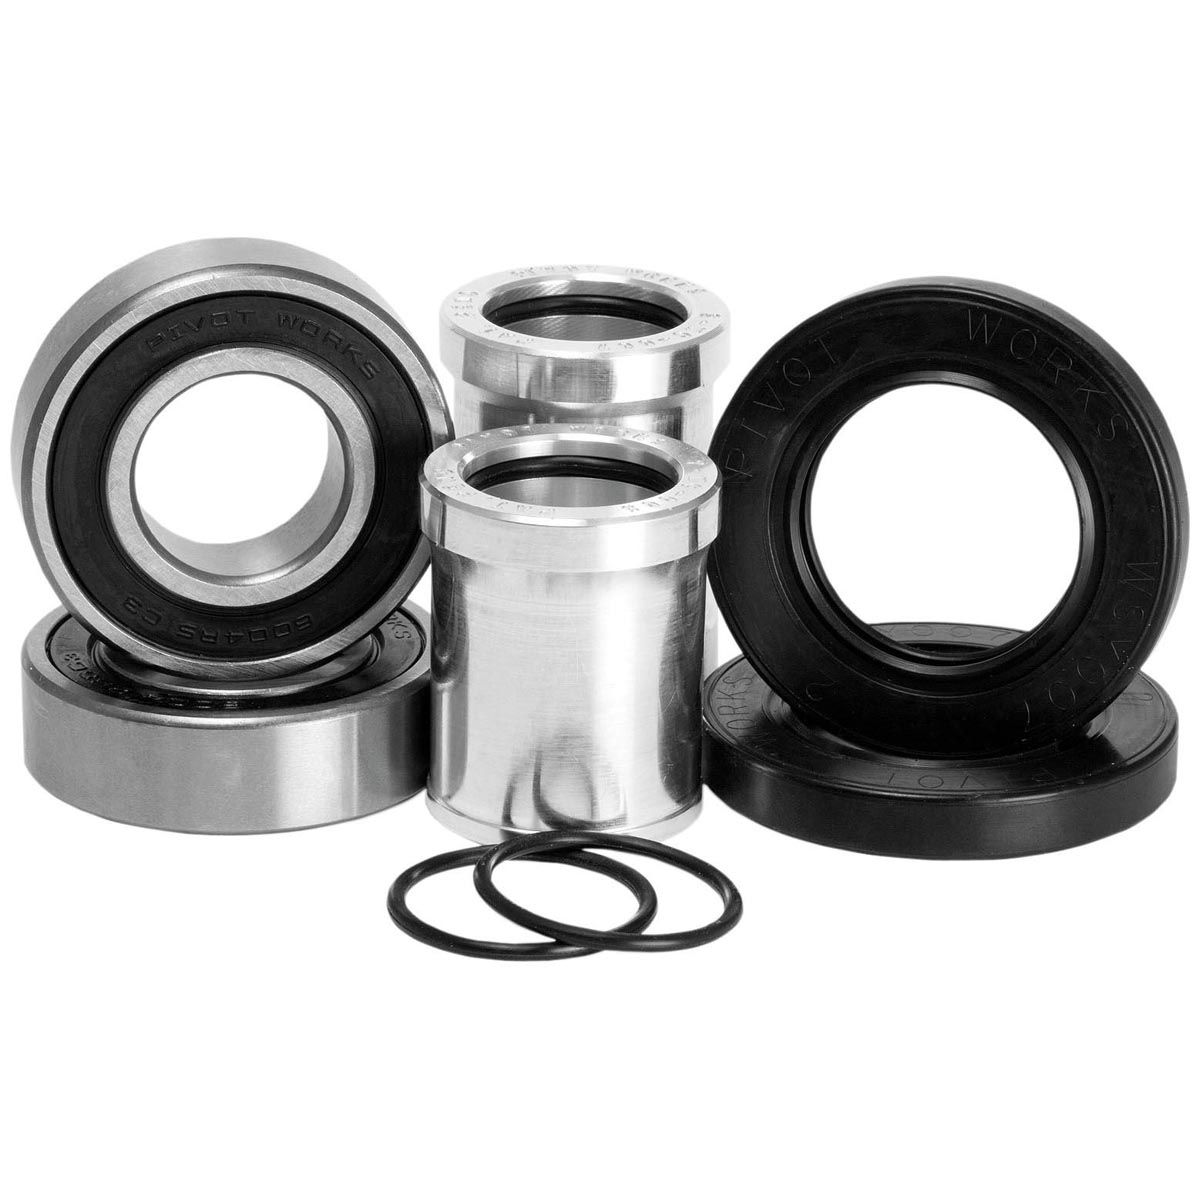 Pivot Works PWRWC-S11-000 Water Tight Wheel Collar and Bearing Kit Rear